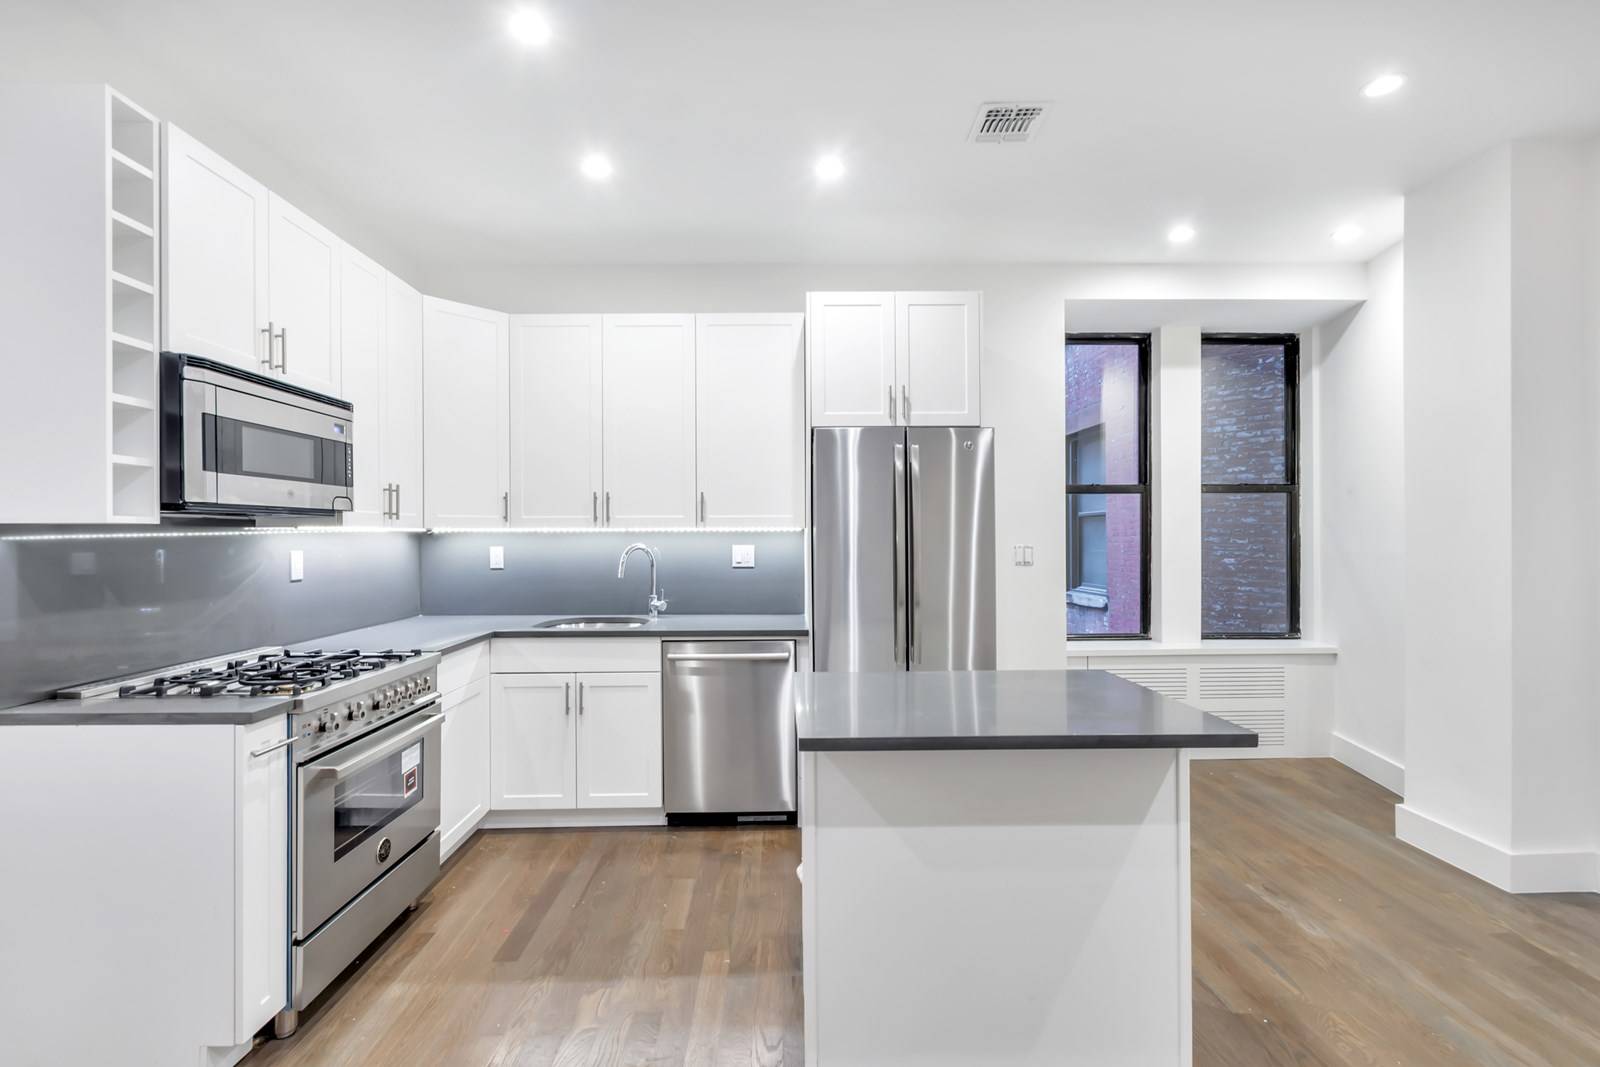 NEWLY RENOVATED 3 BEDROOM 2 BATH APARTMENT...MADISON AVENUE..NEAR 6, N, AND R TRAINS